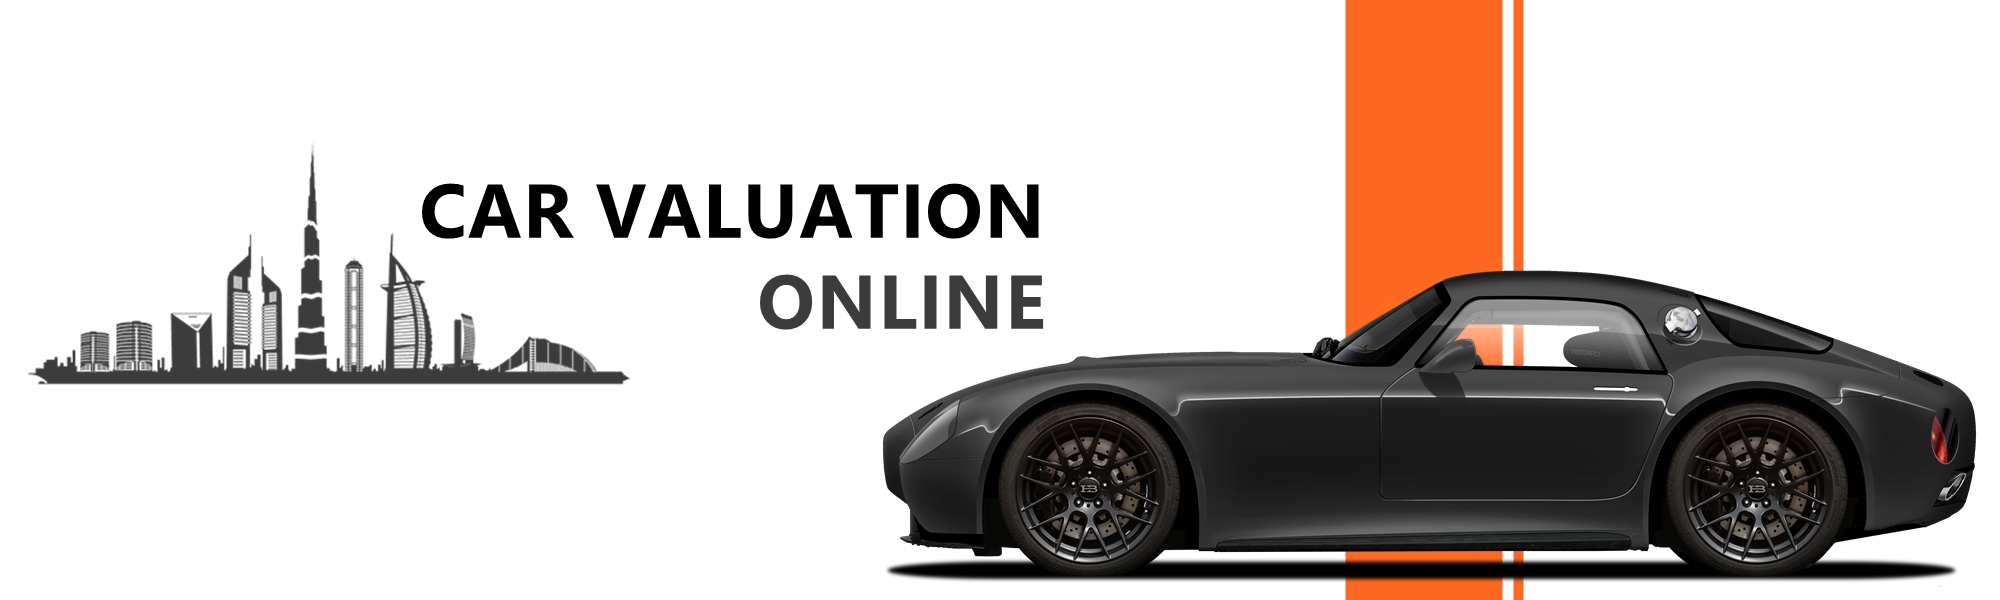 Car Valuation Online - Sell any car today in Dubai